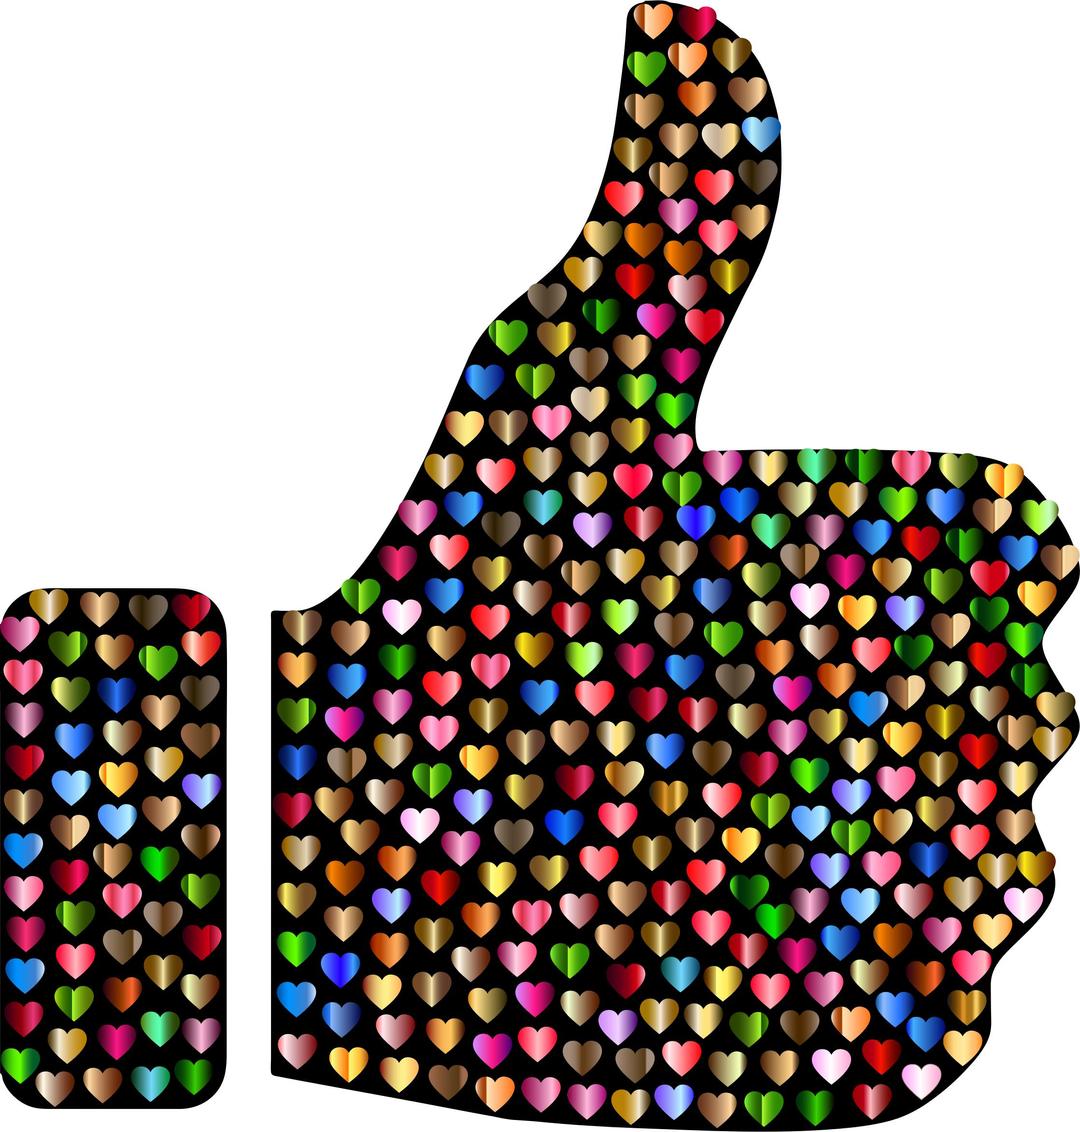 Prismatic Hearts Thumbs Up Silhouette 6 png transparent